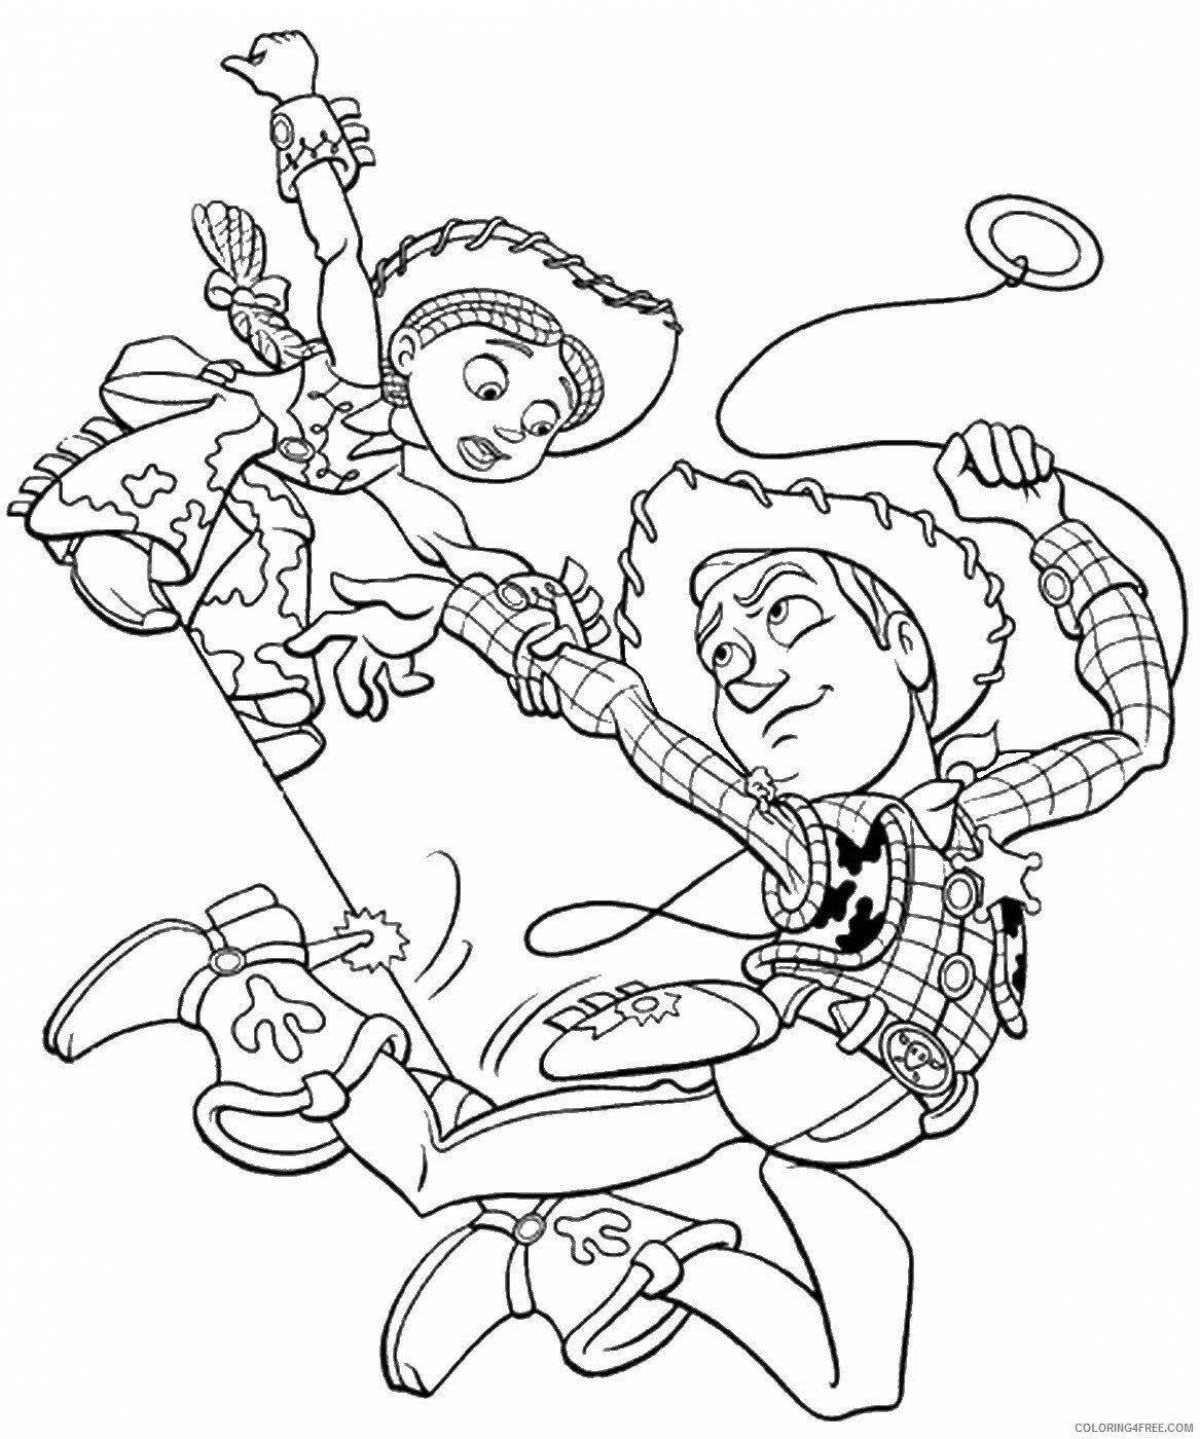 Coloring book adorable jessie toy story